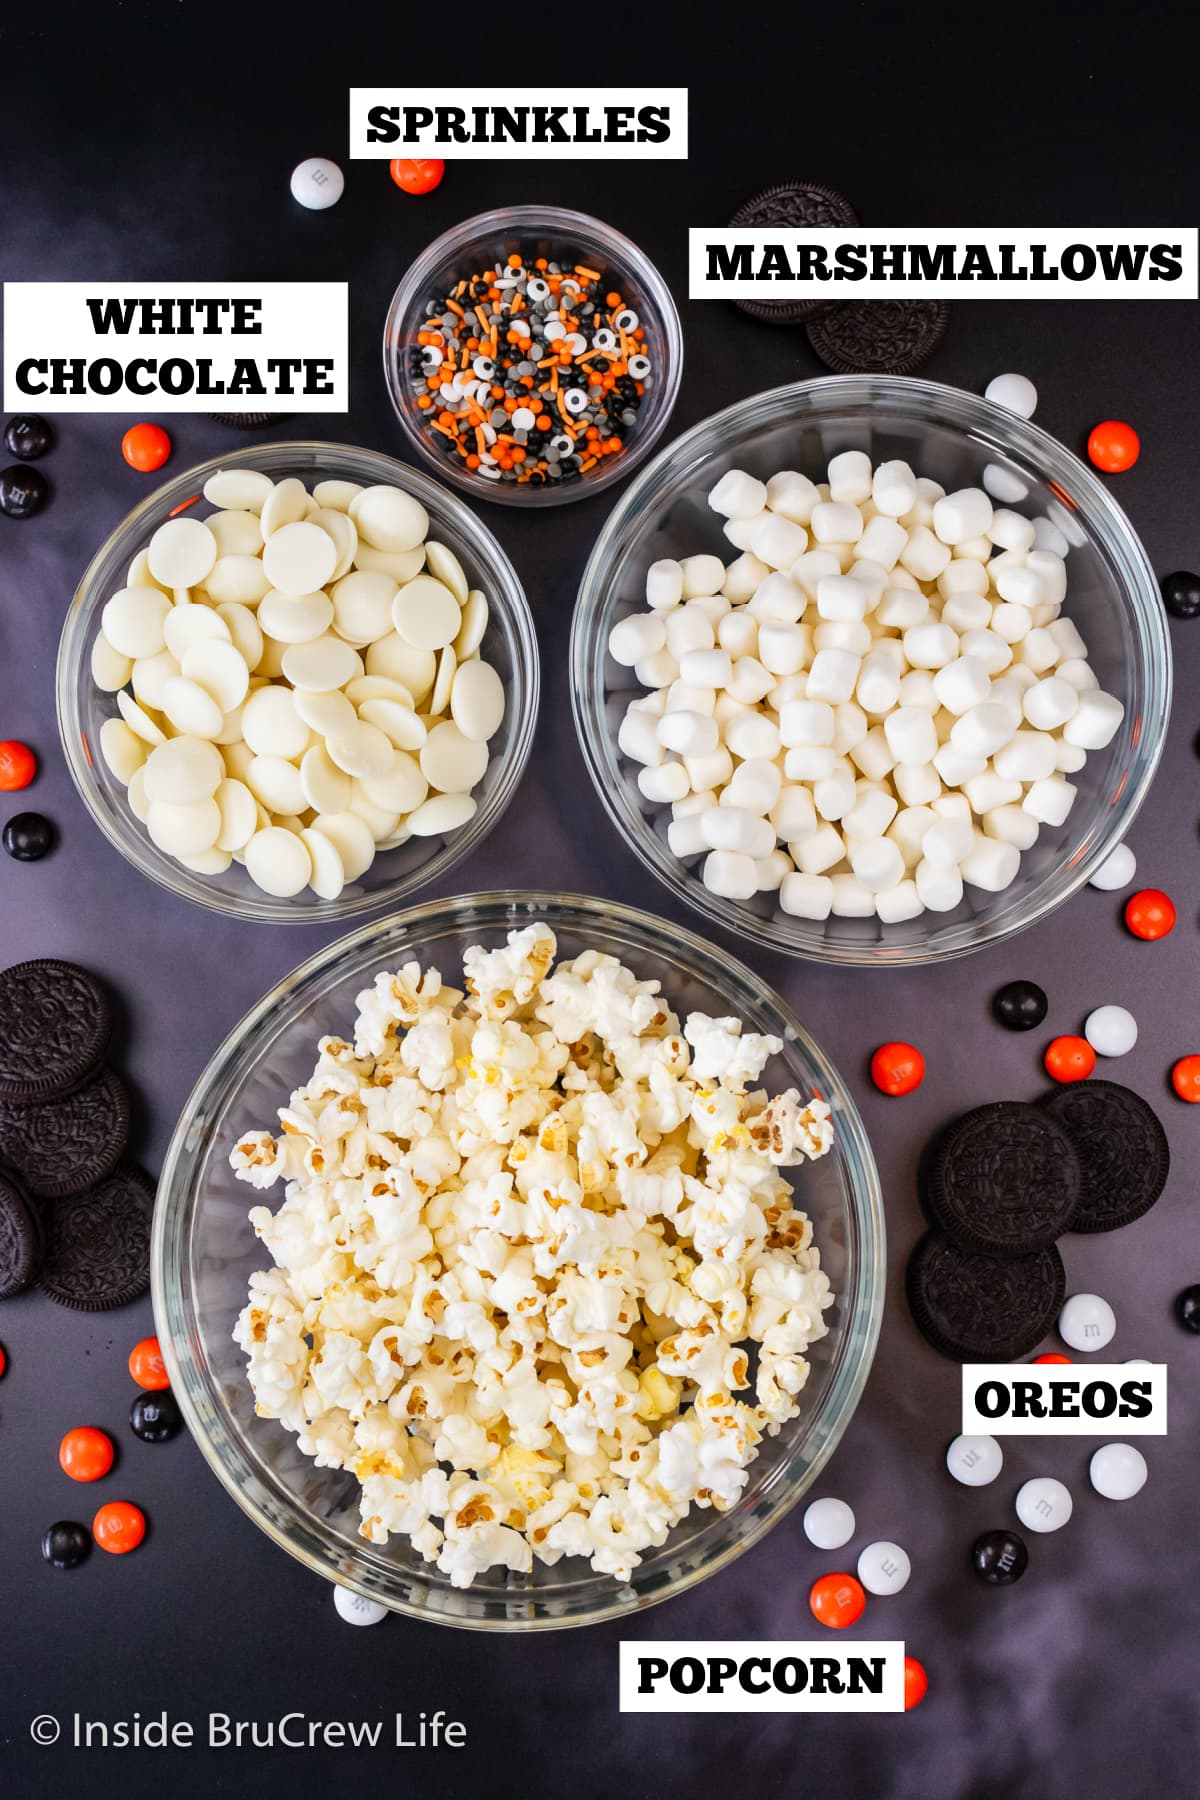 Bowl of ingredients needed to make chocolate covered popcorn with sprinkles.